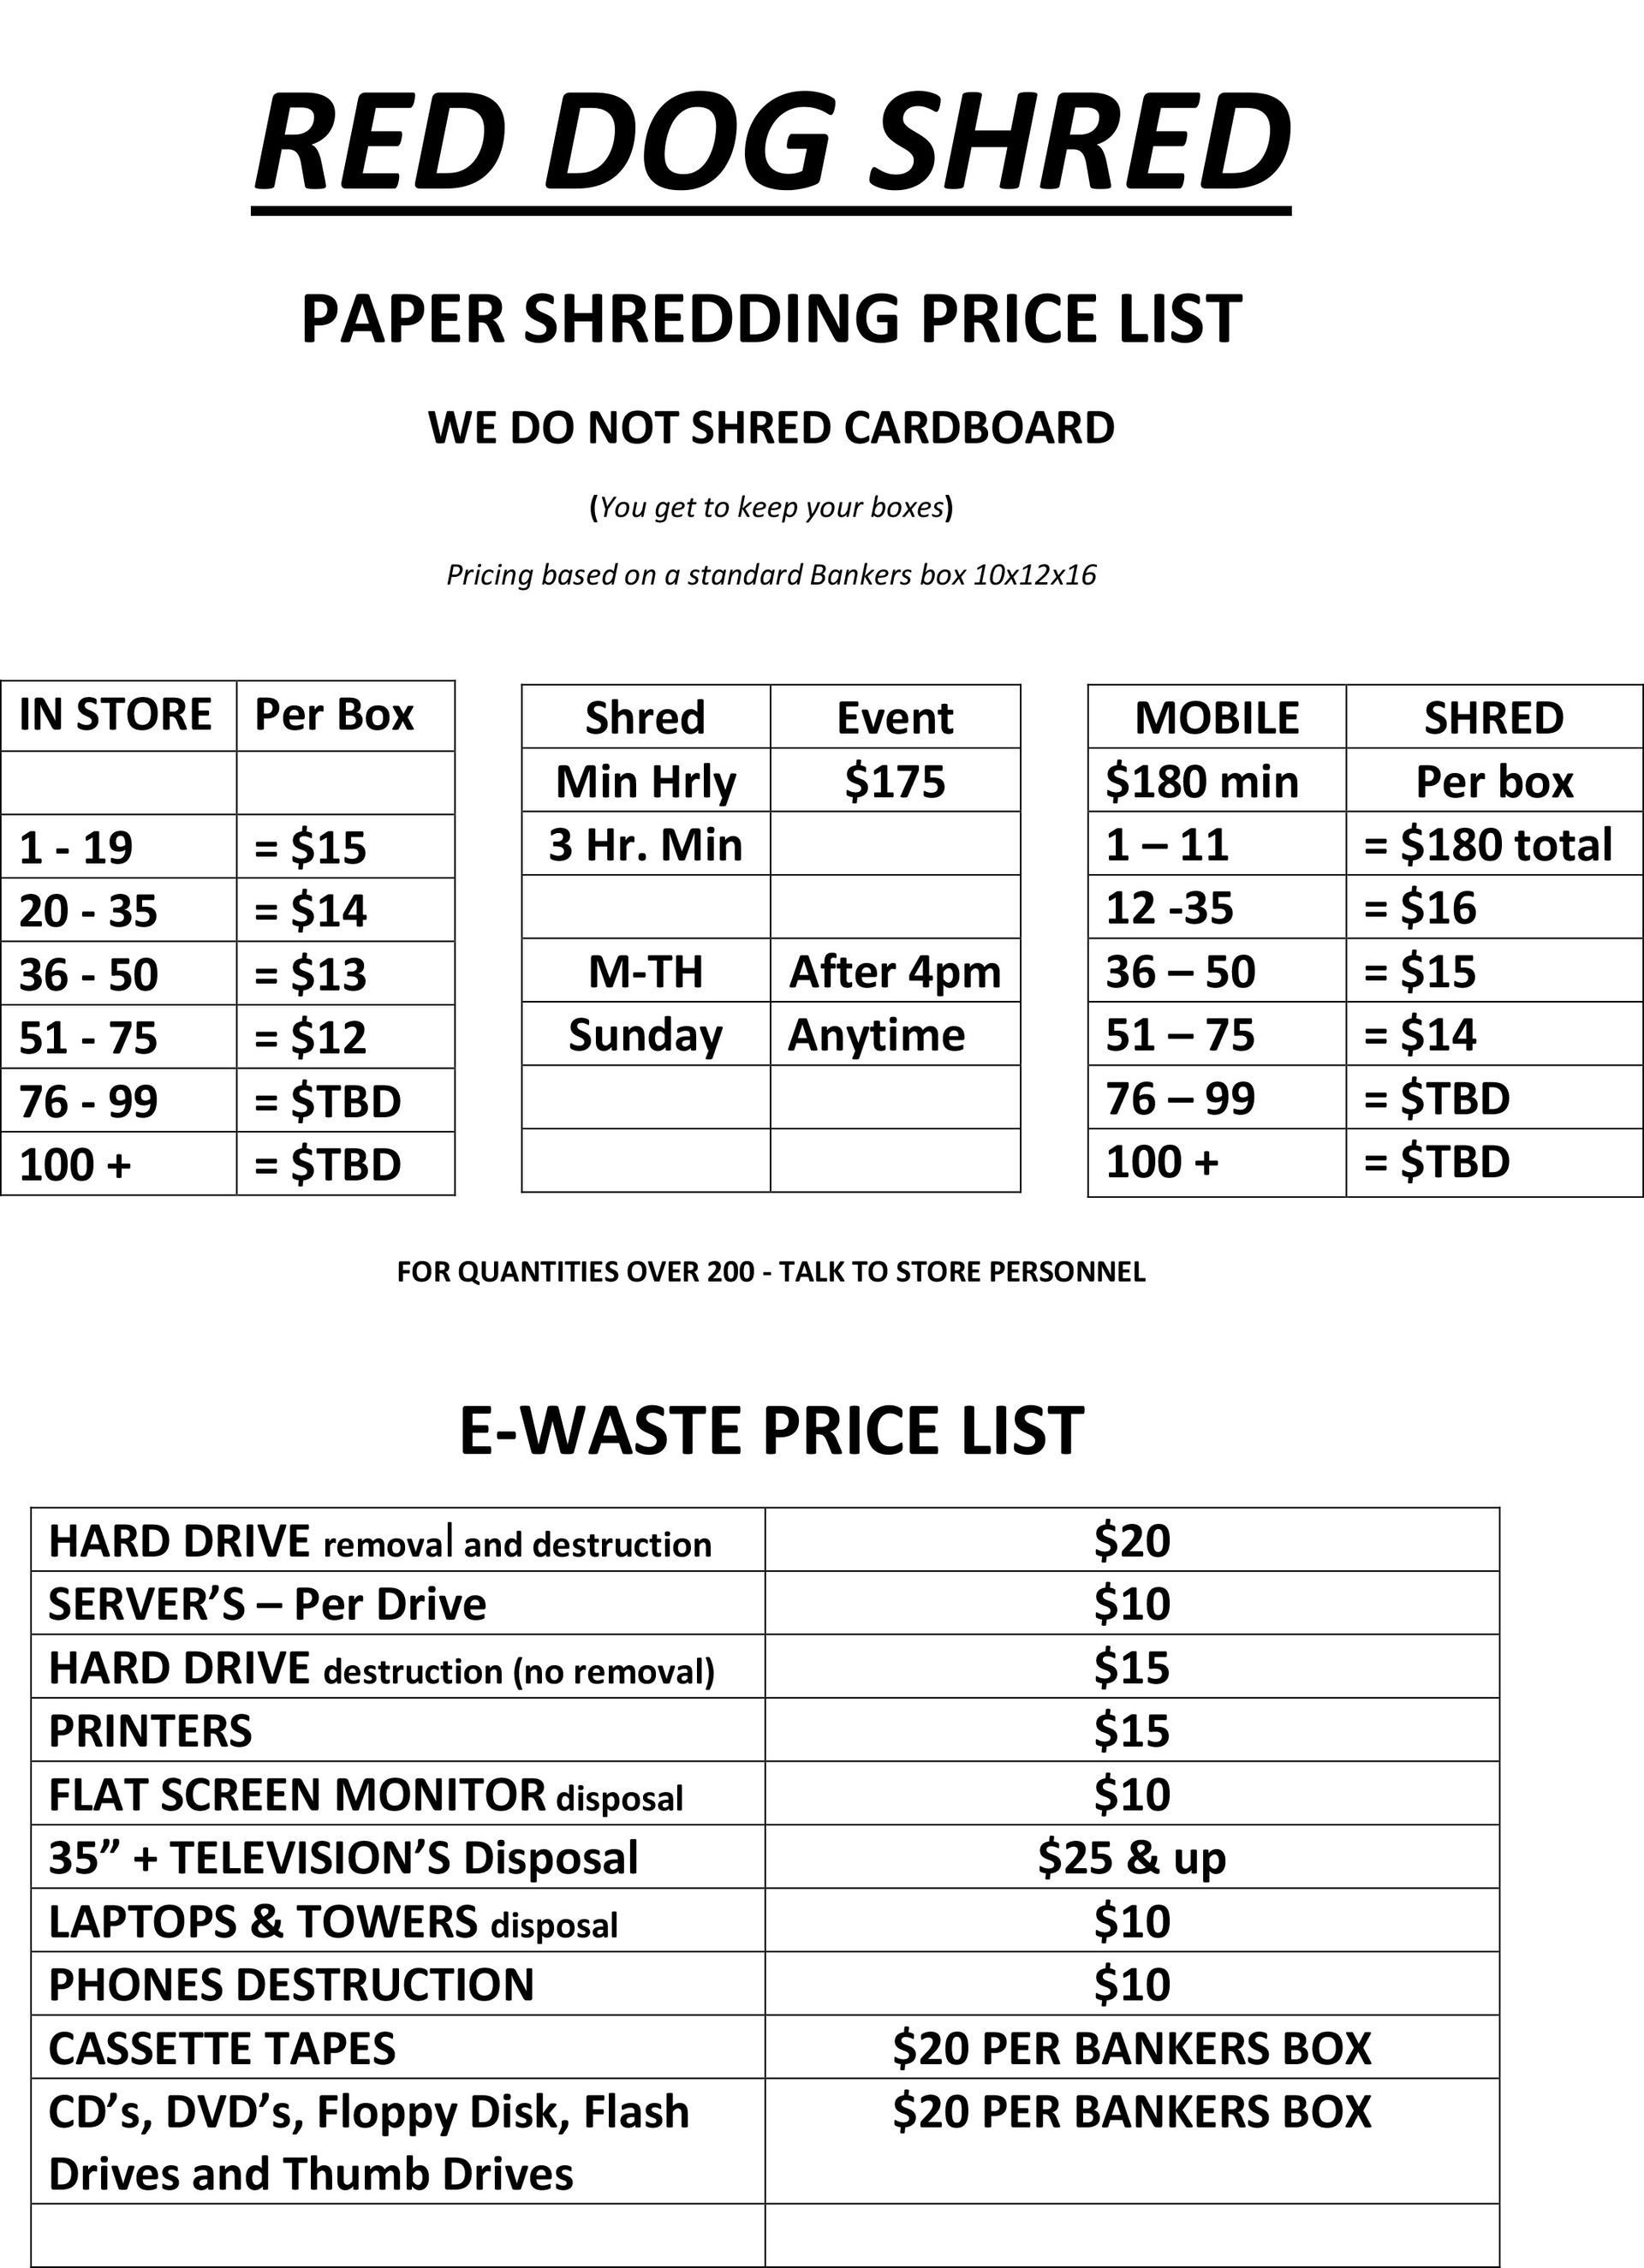 a red dog shred paper shredding price list and e-waste price list | Sacramento, CA | Red Dog Shred